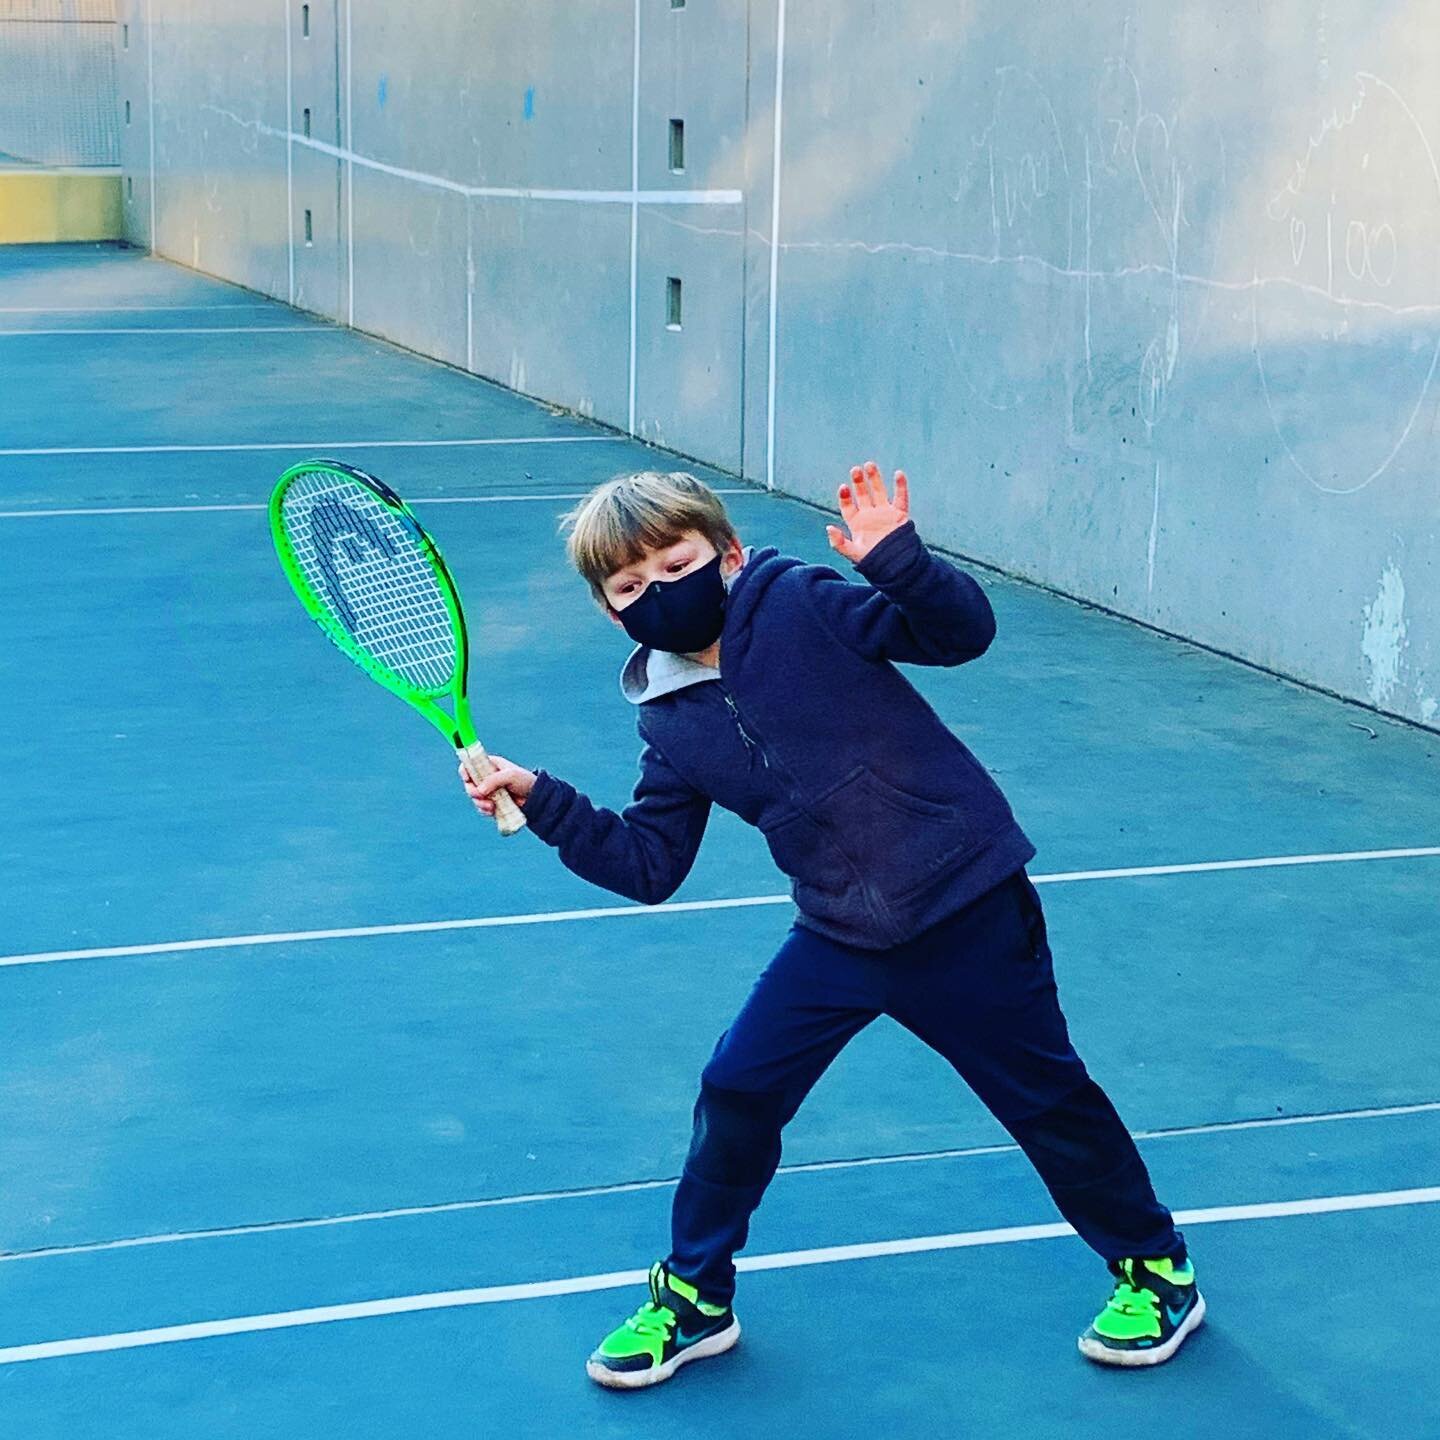 Look at this kid! He&rsquo;s never hit the ball for an hour according to his mom. #longislandcity #lic #lickids #tennisforkids #activitiesforkids